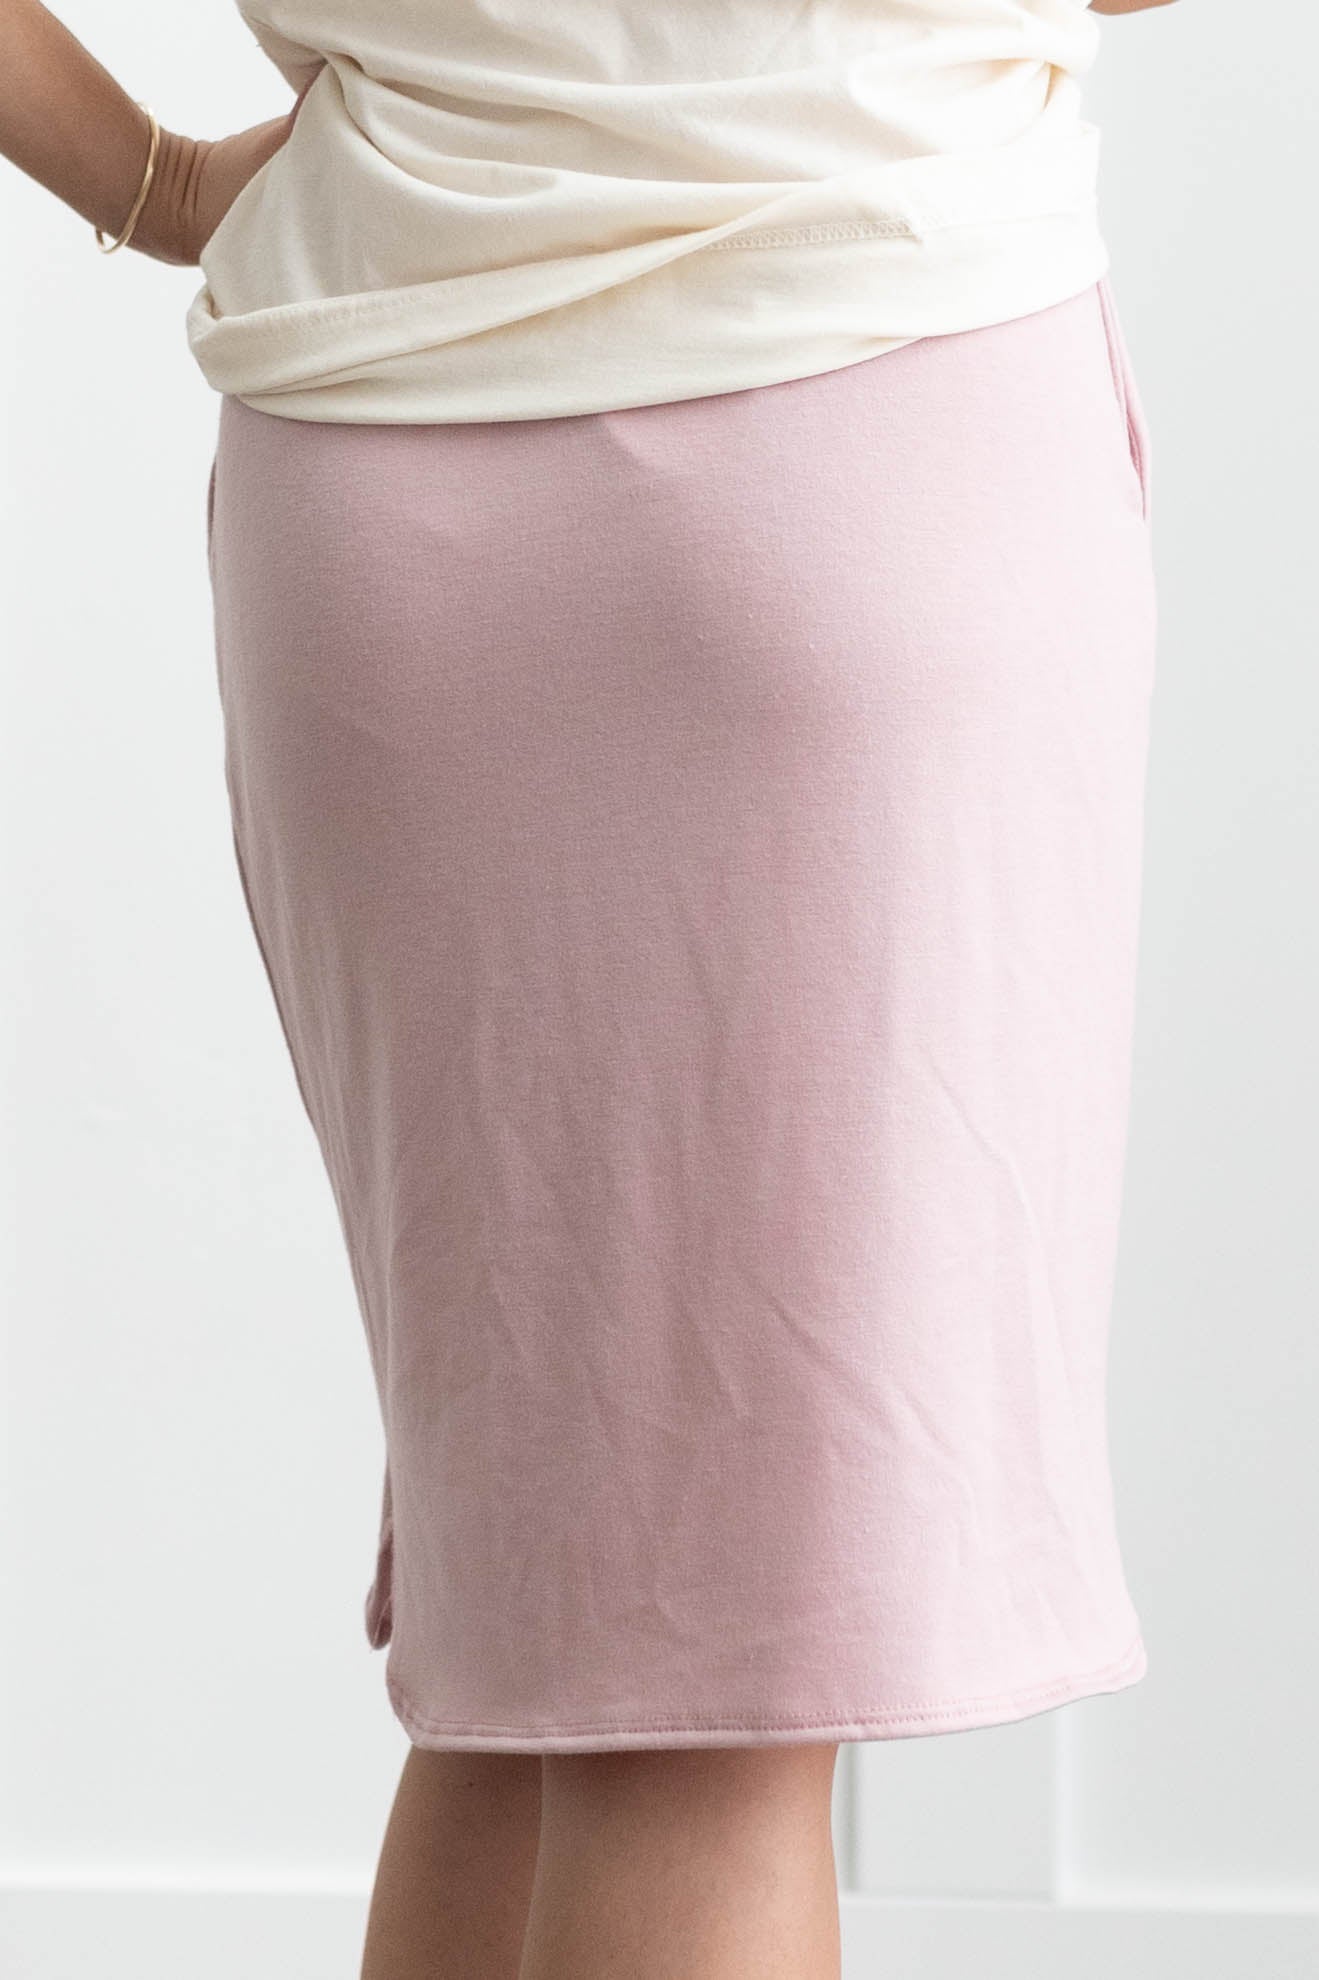 Back view of a dusty pink skirt